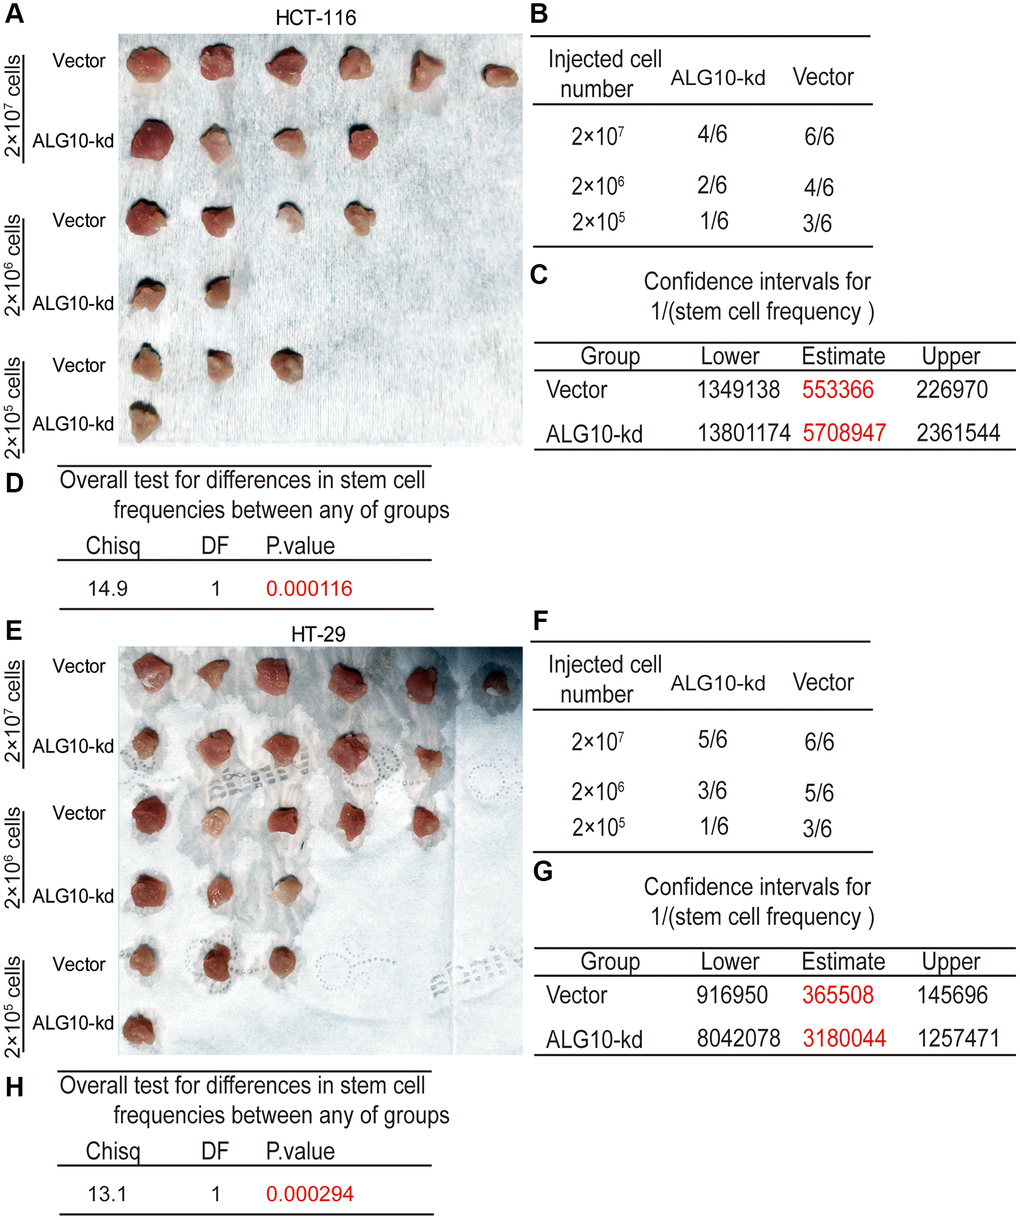 ALG10 knockdown attenuates the tumor-initiating ability of CRC cells. (A) Tumor images derived from HCT-116 cells with or without ALG10 knockdown at different cell concentrations. (B) Tumor formation ratio was calculated for HCT-116 cells with or without ALG10 knockdown at different cell concentrations. (C) The 1/(stem cell frequency) was determined for HCT-116 cells with or without ALG10 knockdown using an ELDA: Extreme Limiting Dilution Analysis (http://bioinf.wehi.edu.au/software/elda/). (D) The difference in stem cell frequencies between the two groups described in (C) was measured using an ELDA: Extreme Limiting Dilution Analysis (http://bioinf.wehi.edu.au/software/elda/). (E) Tumor images derived from HT-29 cells with or without ALG10 knockdown at different cell concentrations. (F) Tumor formation ratio was calculated for HT-29 cells with or without ALG10 knockdown at different cell concentrations. (G) The 1/(stem cell frequency) was determined for HT-29 cells with or without ALG10 knockdown using an ELDA: Extreme Limiting Dilution Analysis (http://bioinf.wehi.edu.au/software/elda/). (H) The difference in stem cell frequencies between the two groups described in (G) was measured using an ELDA: Extreme Limiting Dilution Analysis (http://bioinf.wehi.edu.au/software/elda/).